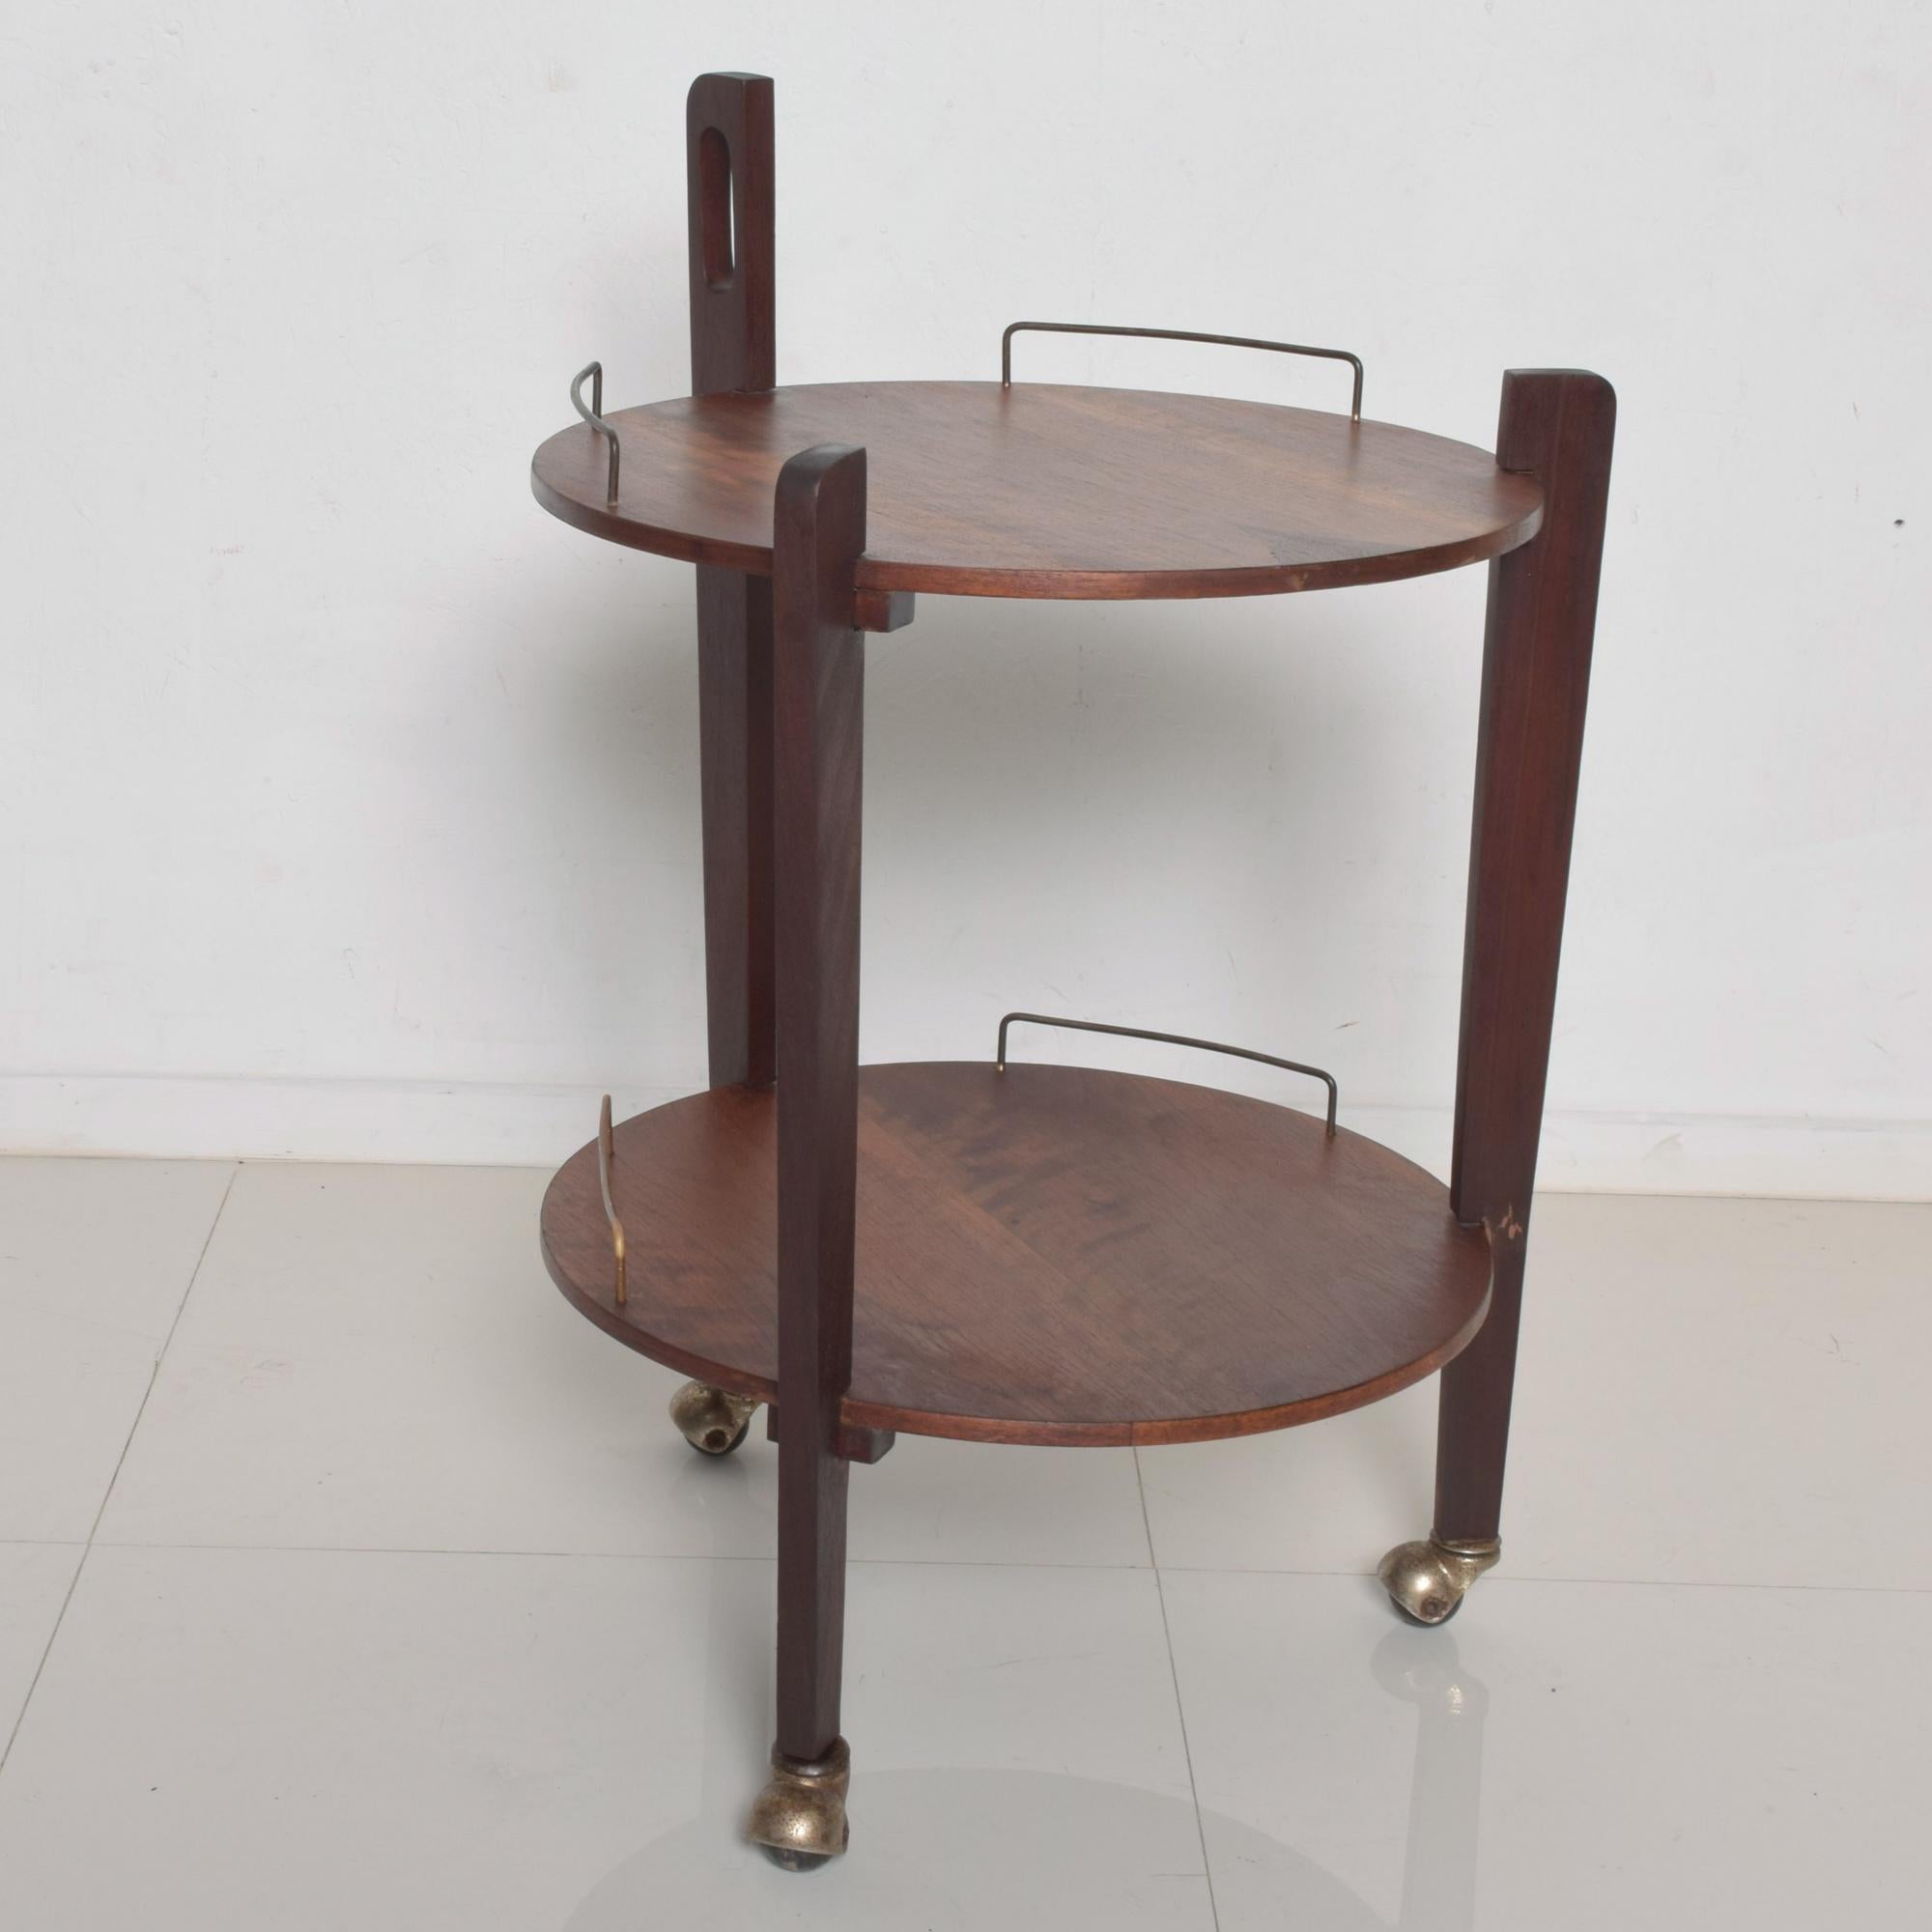 Fabulous Mexican Modernist sexy service cart trolley bar side table in wood with brass accents on casters.
In the manner of Eugenio Escudero. No label present.

Striking 2-tiered modern design

Dimensions: 32